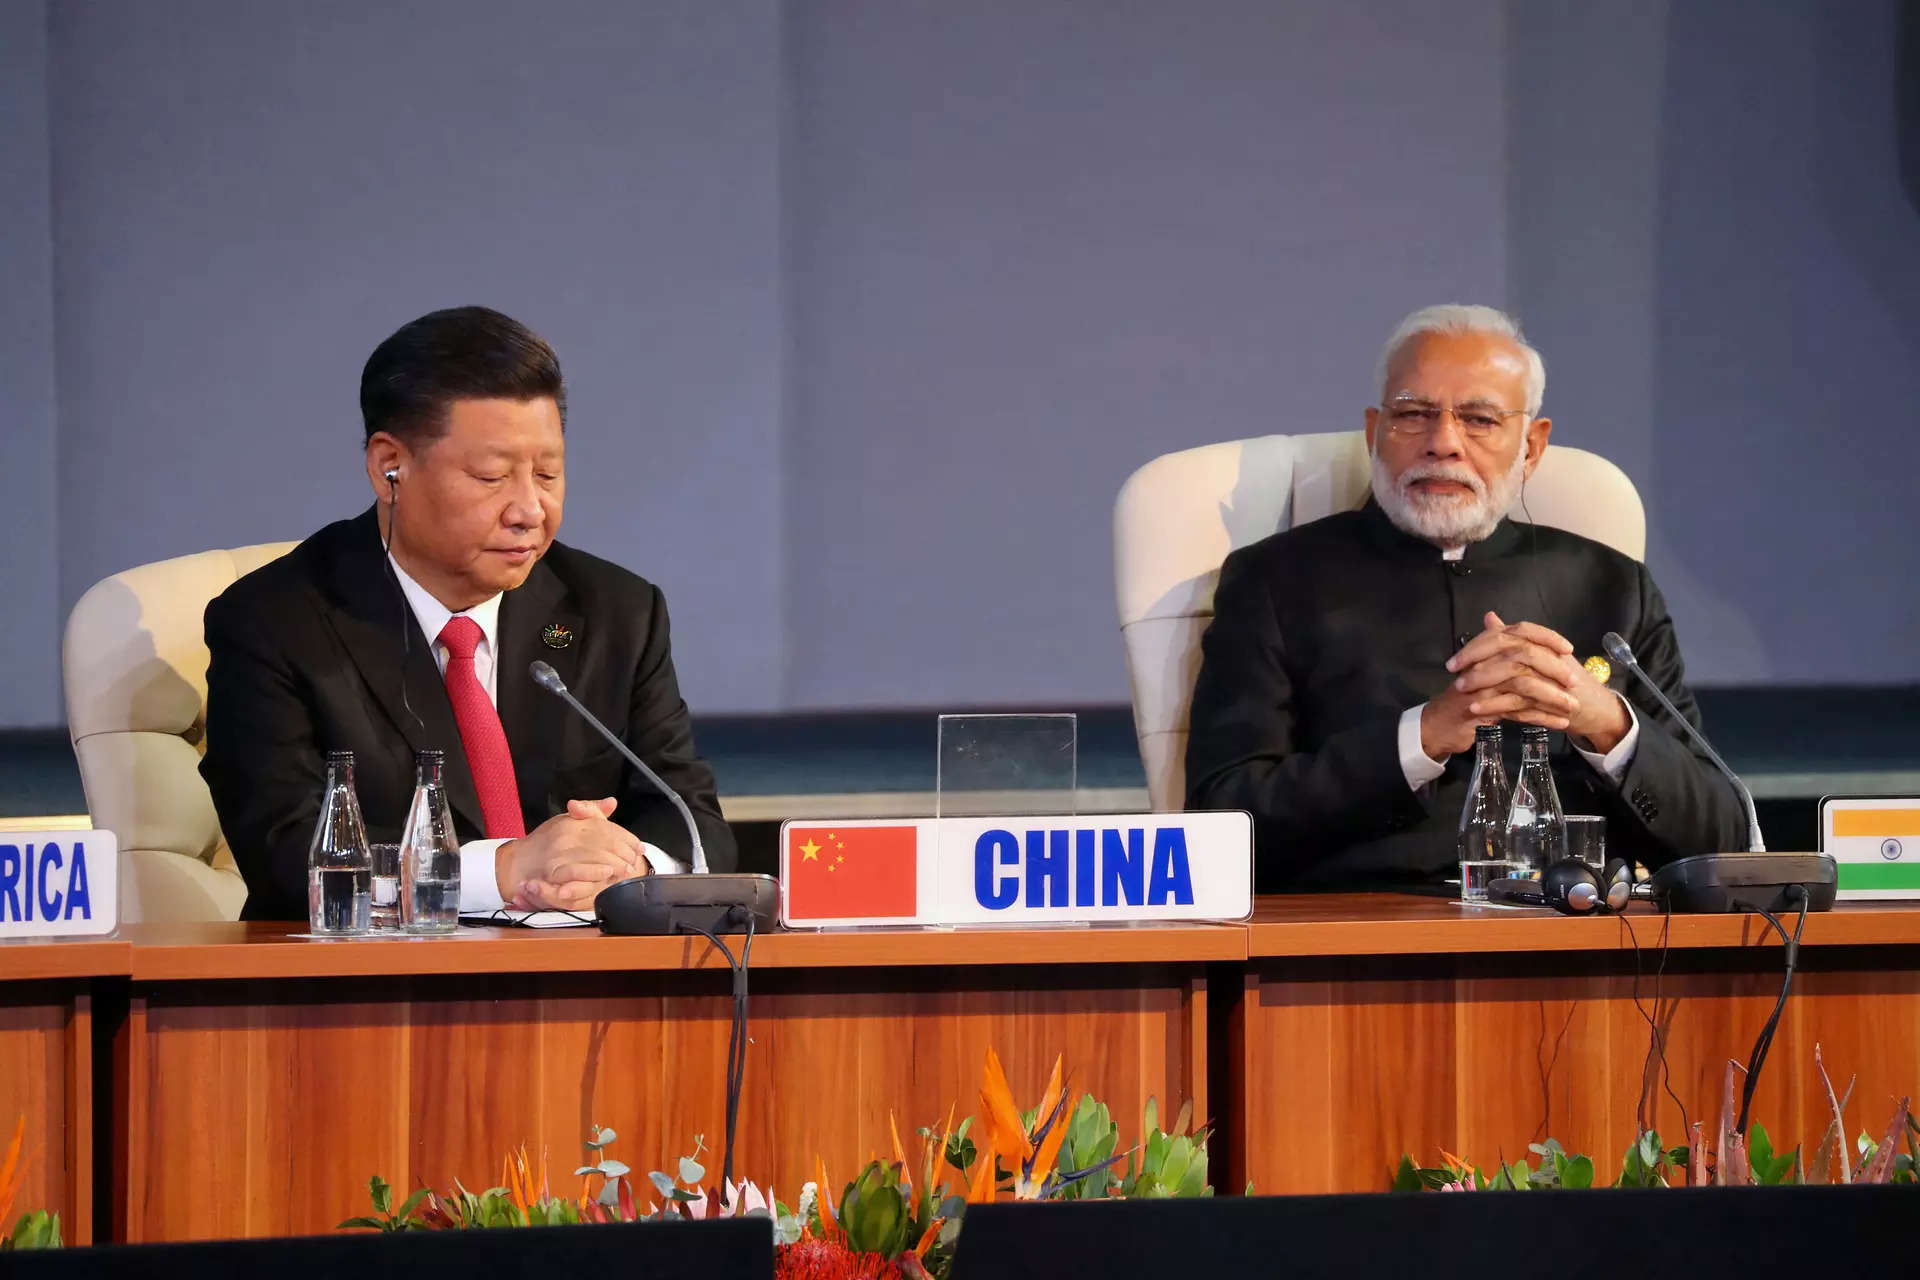 Ties with China important and significant, says PM Modi 